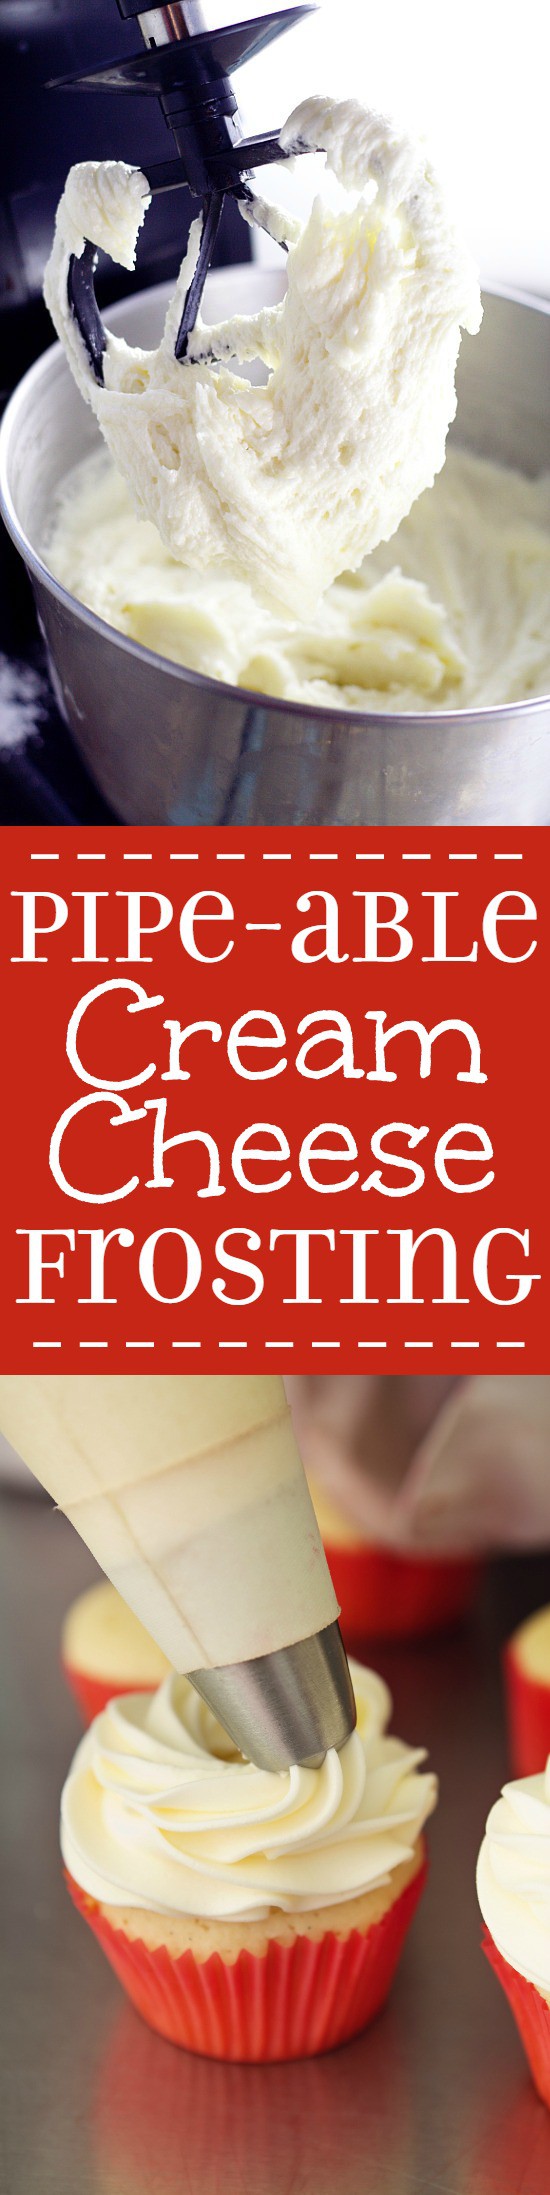 Pipeable Cream Cheese Frosting Recipe. The perfect Pipeable Cream Cheese Frosting for piping beautiful swirls onto cakes and cupcakes that's versatile and yummy enough for all of your favorite treats! Easy to make too!